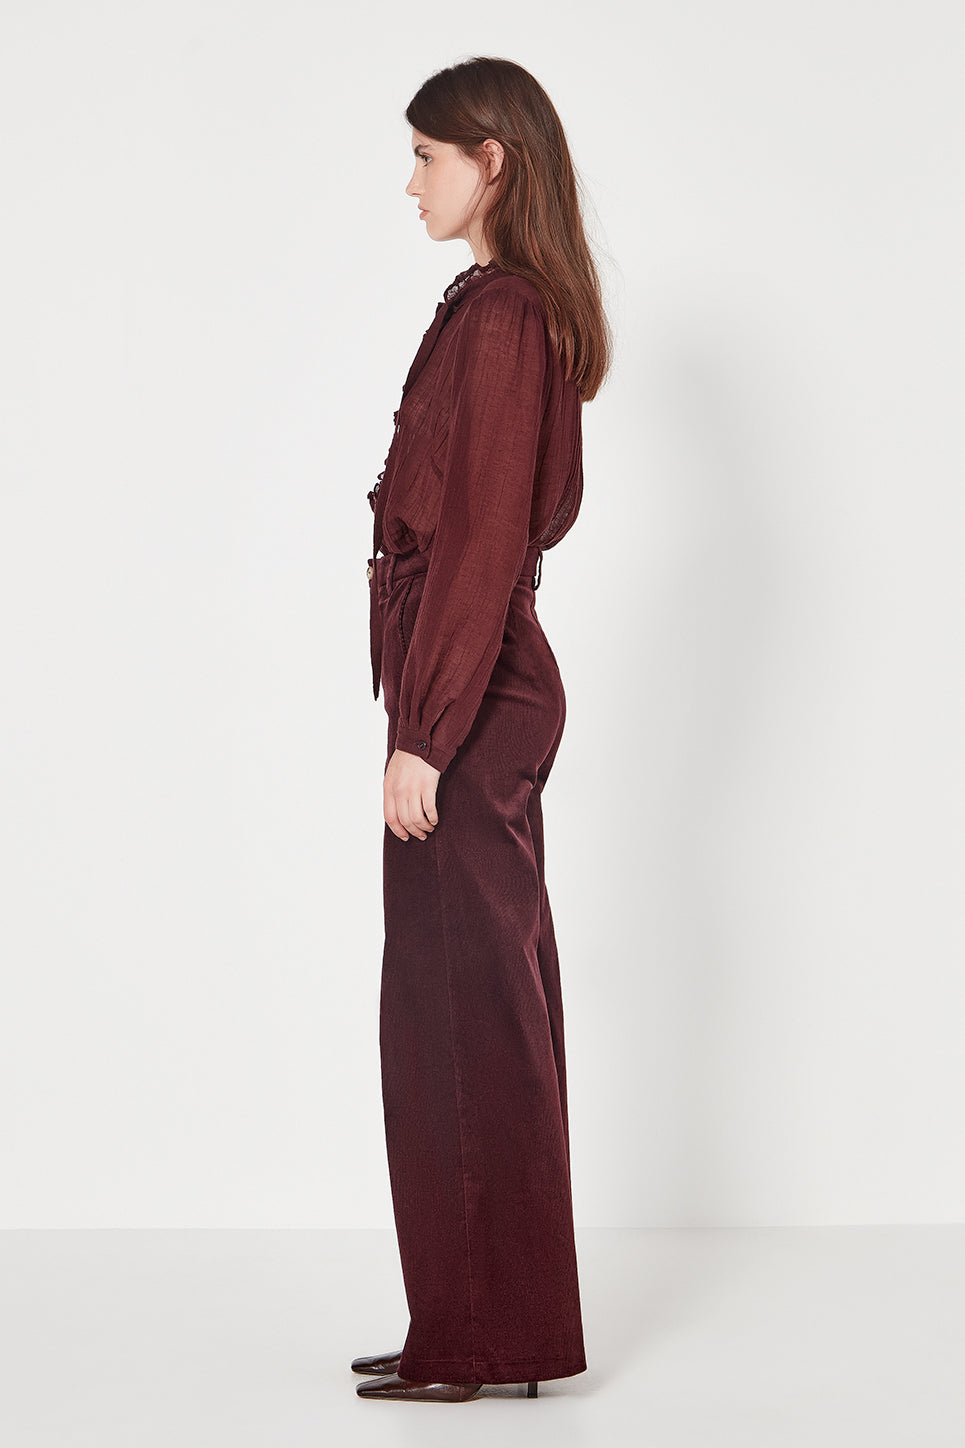 The Florence Blouse in Bordeaux